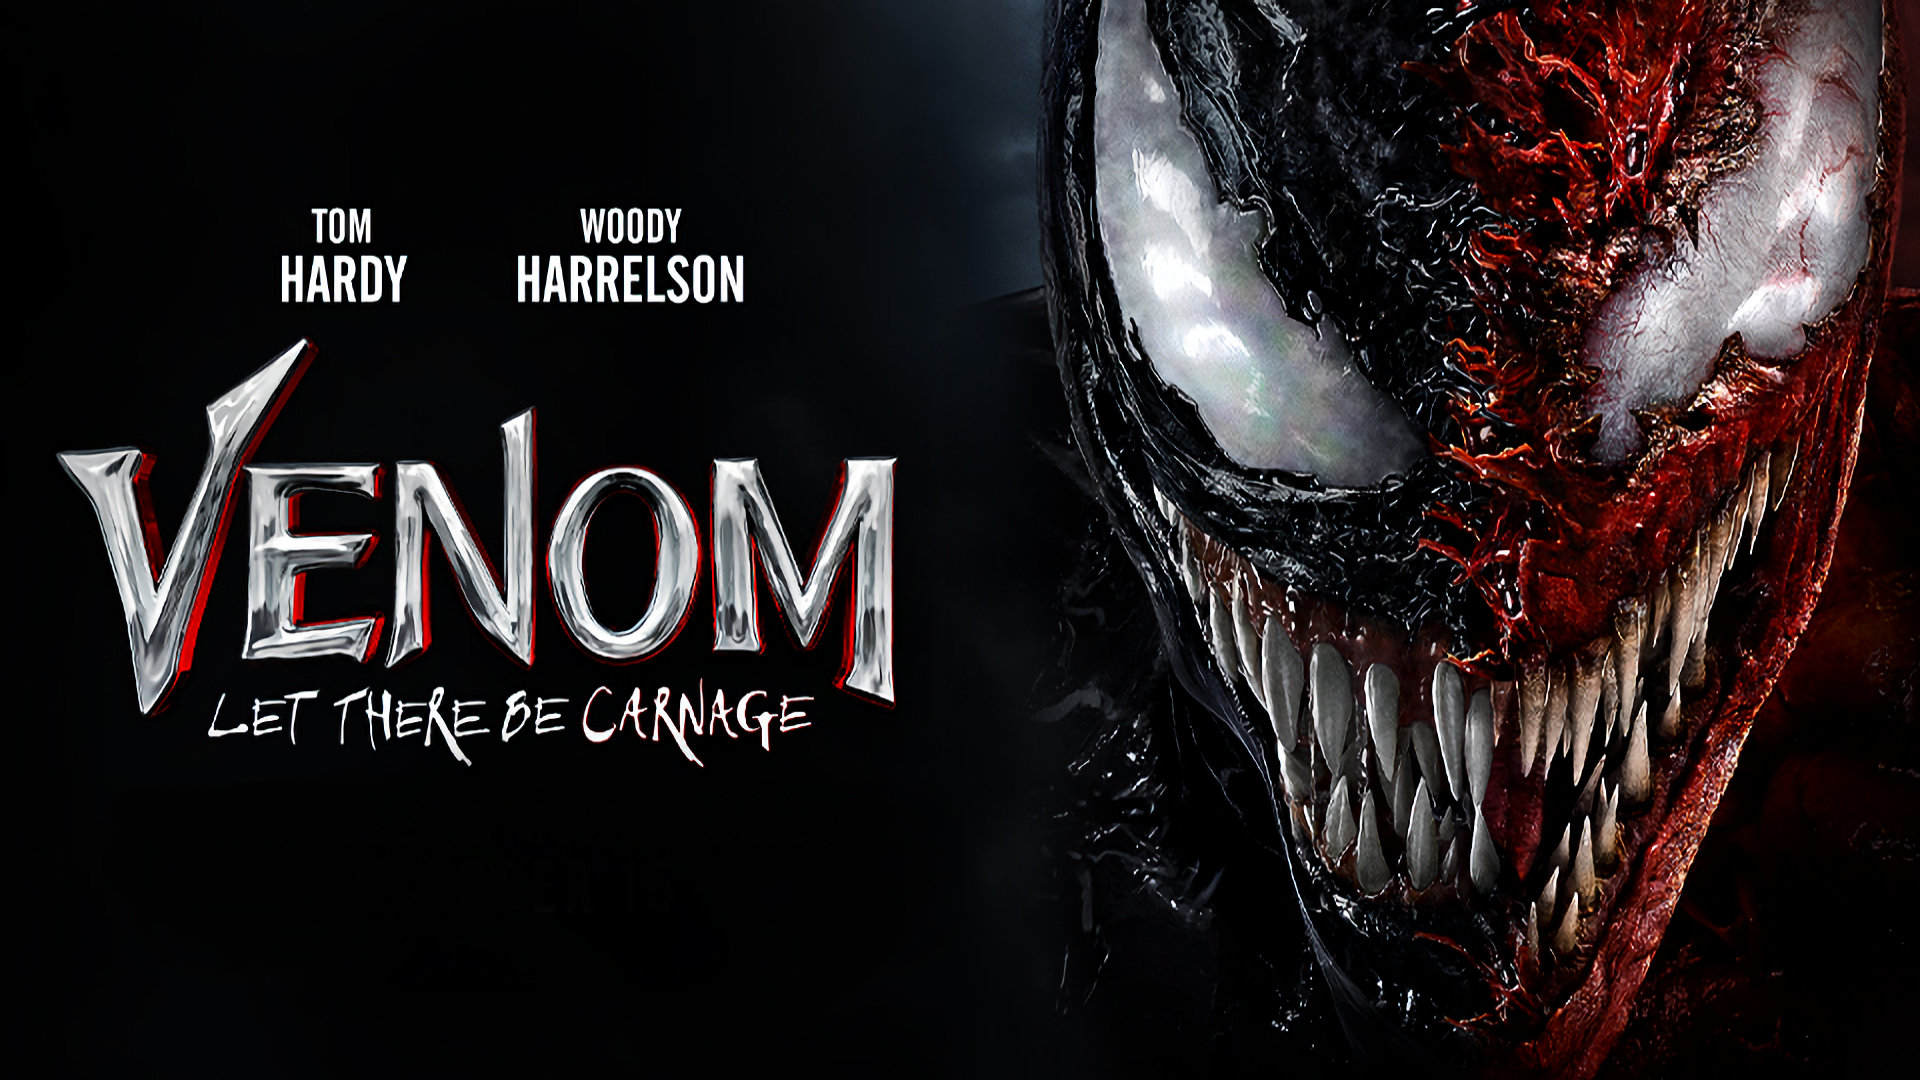 New Venom Posters Unleash All The Carnage! of the Force